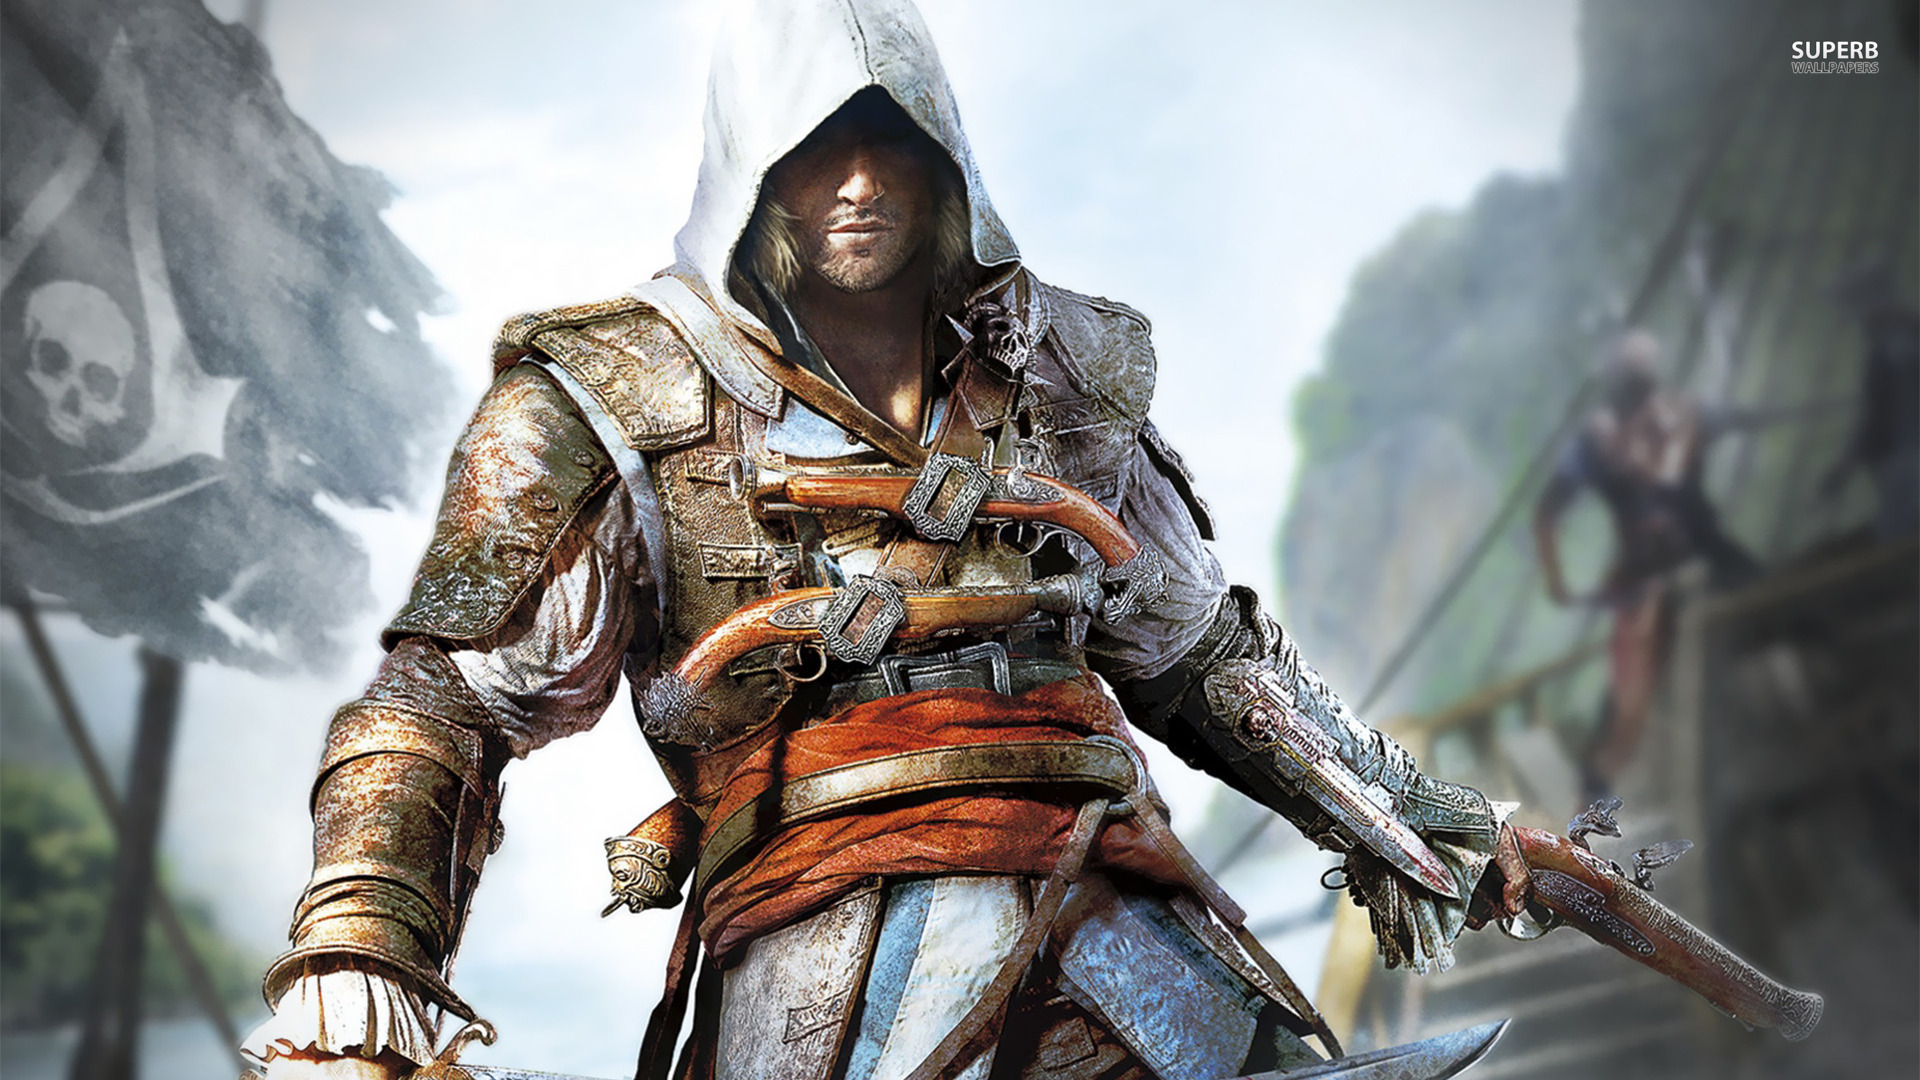 assassin's creed wallpaper 1080p,action adventure game,pc game,warlord,cg artwork,adventure game